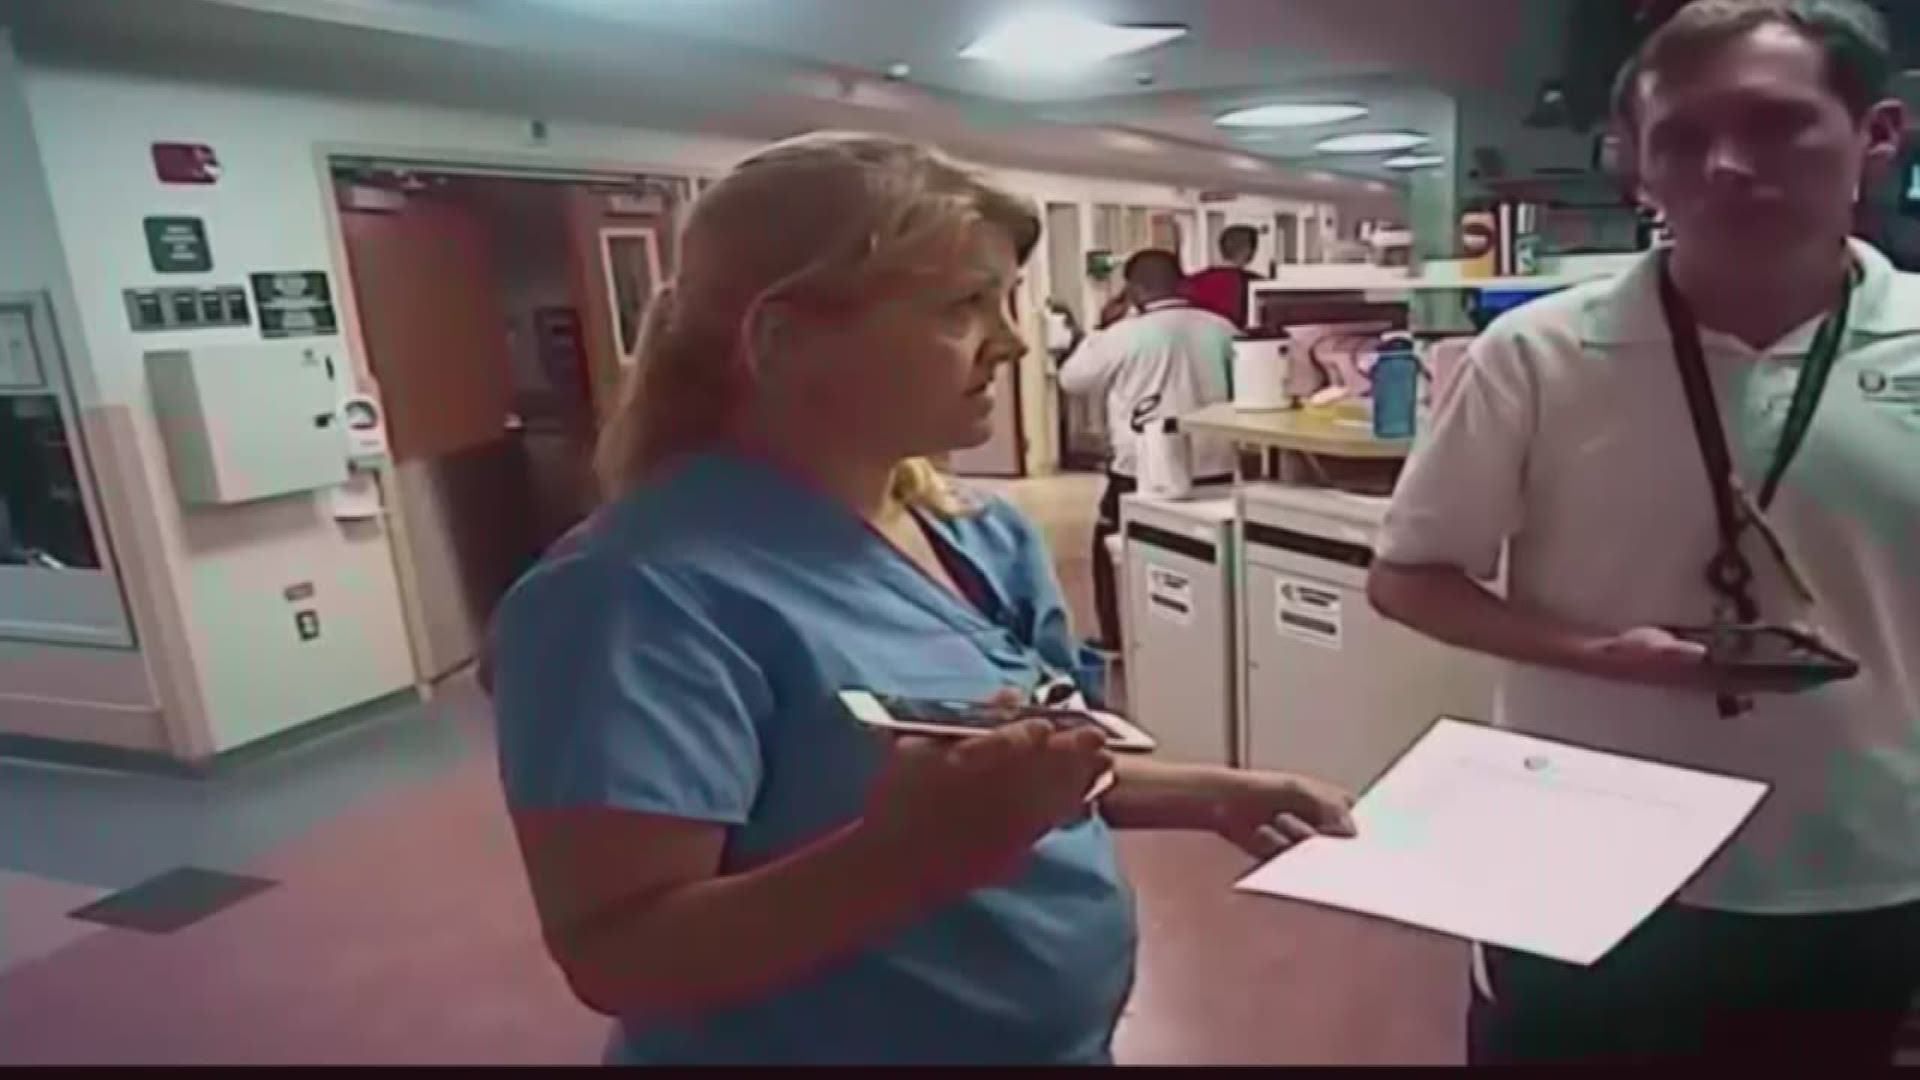 Nurse refuses blood test on unconscious patient; gets cuffed